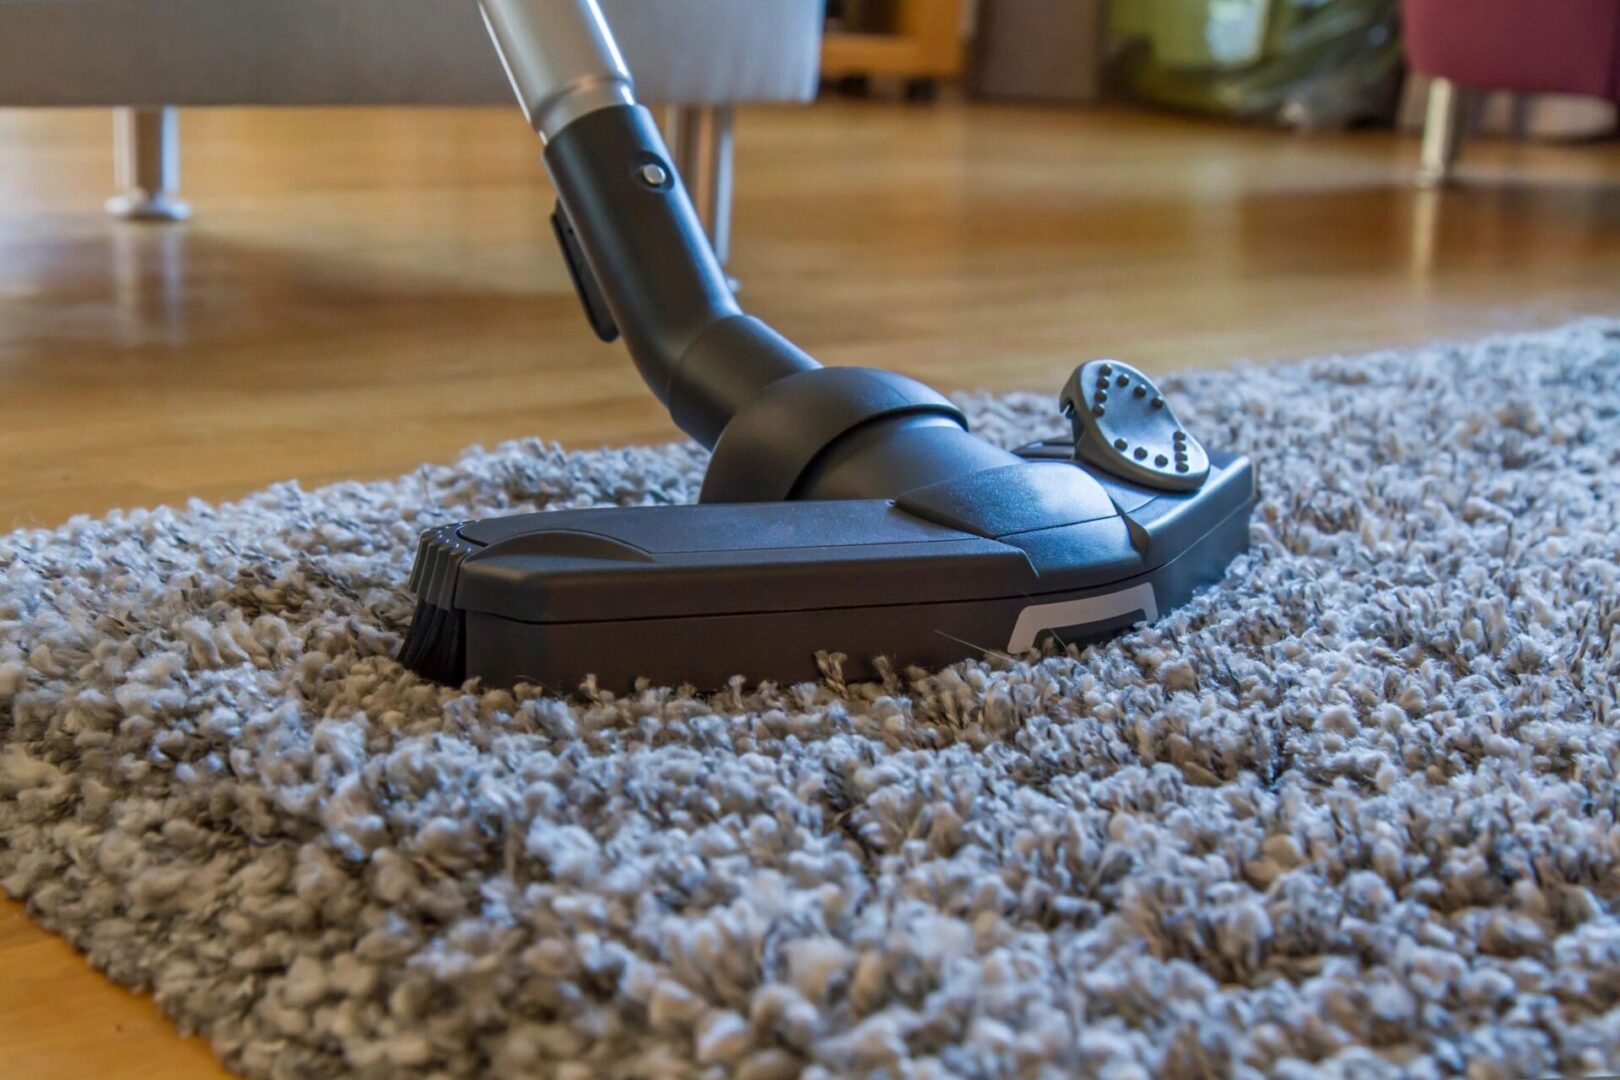 A vacuum cleaner is on the floor of a carpet.